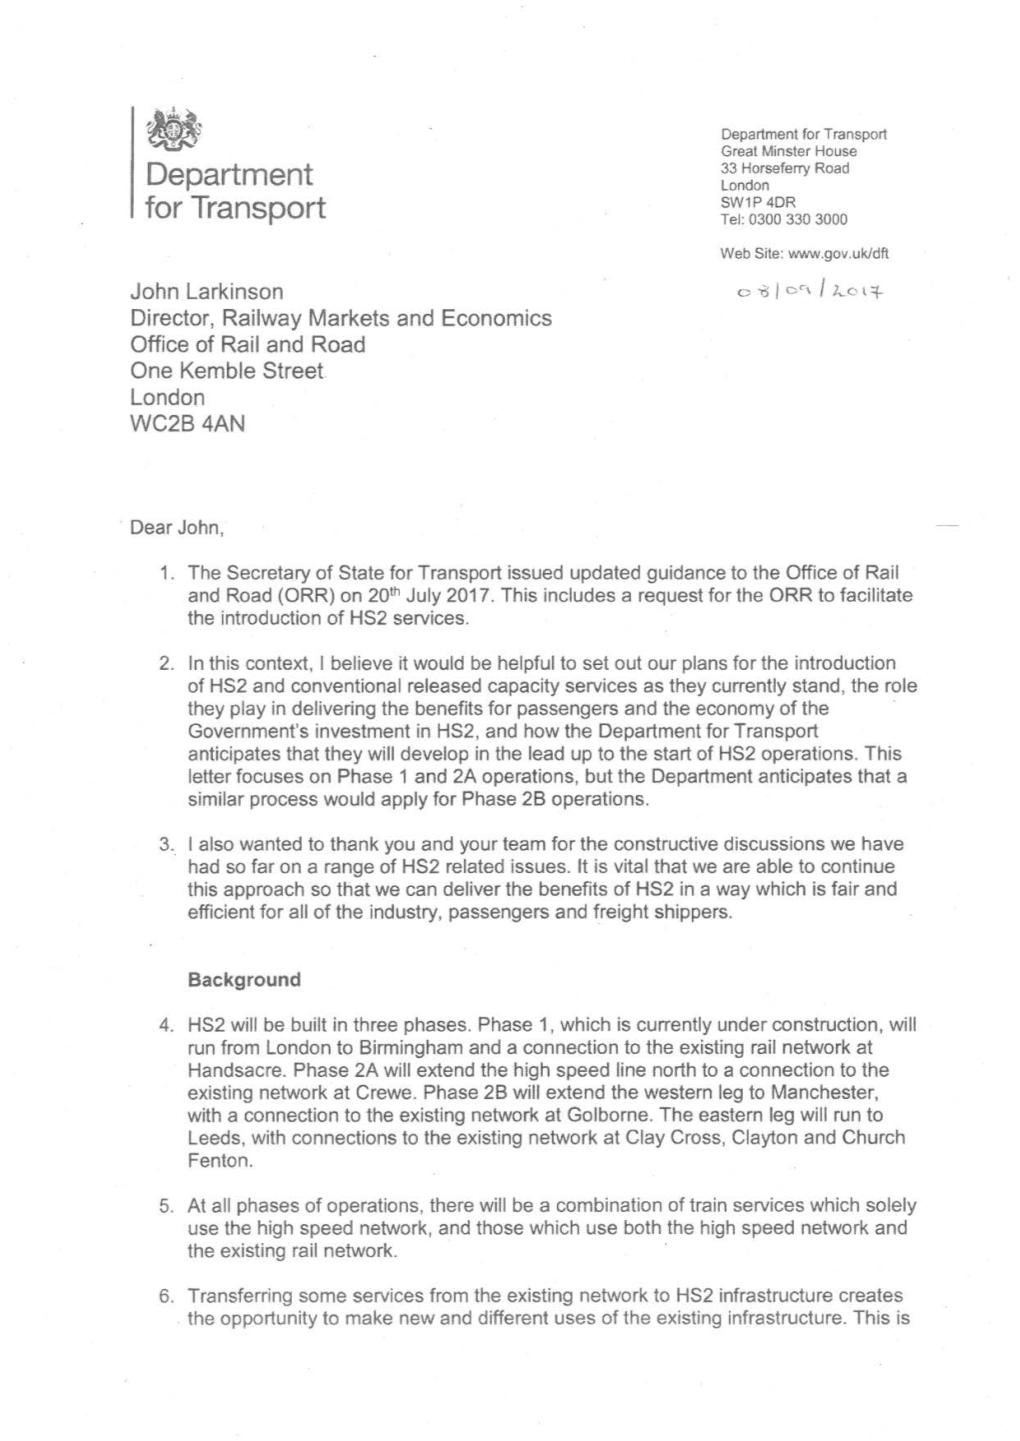 Letter from the Department for Transport to the Office of Rail and Road on HS2 Track Access Issues